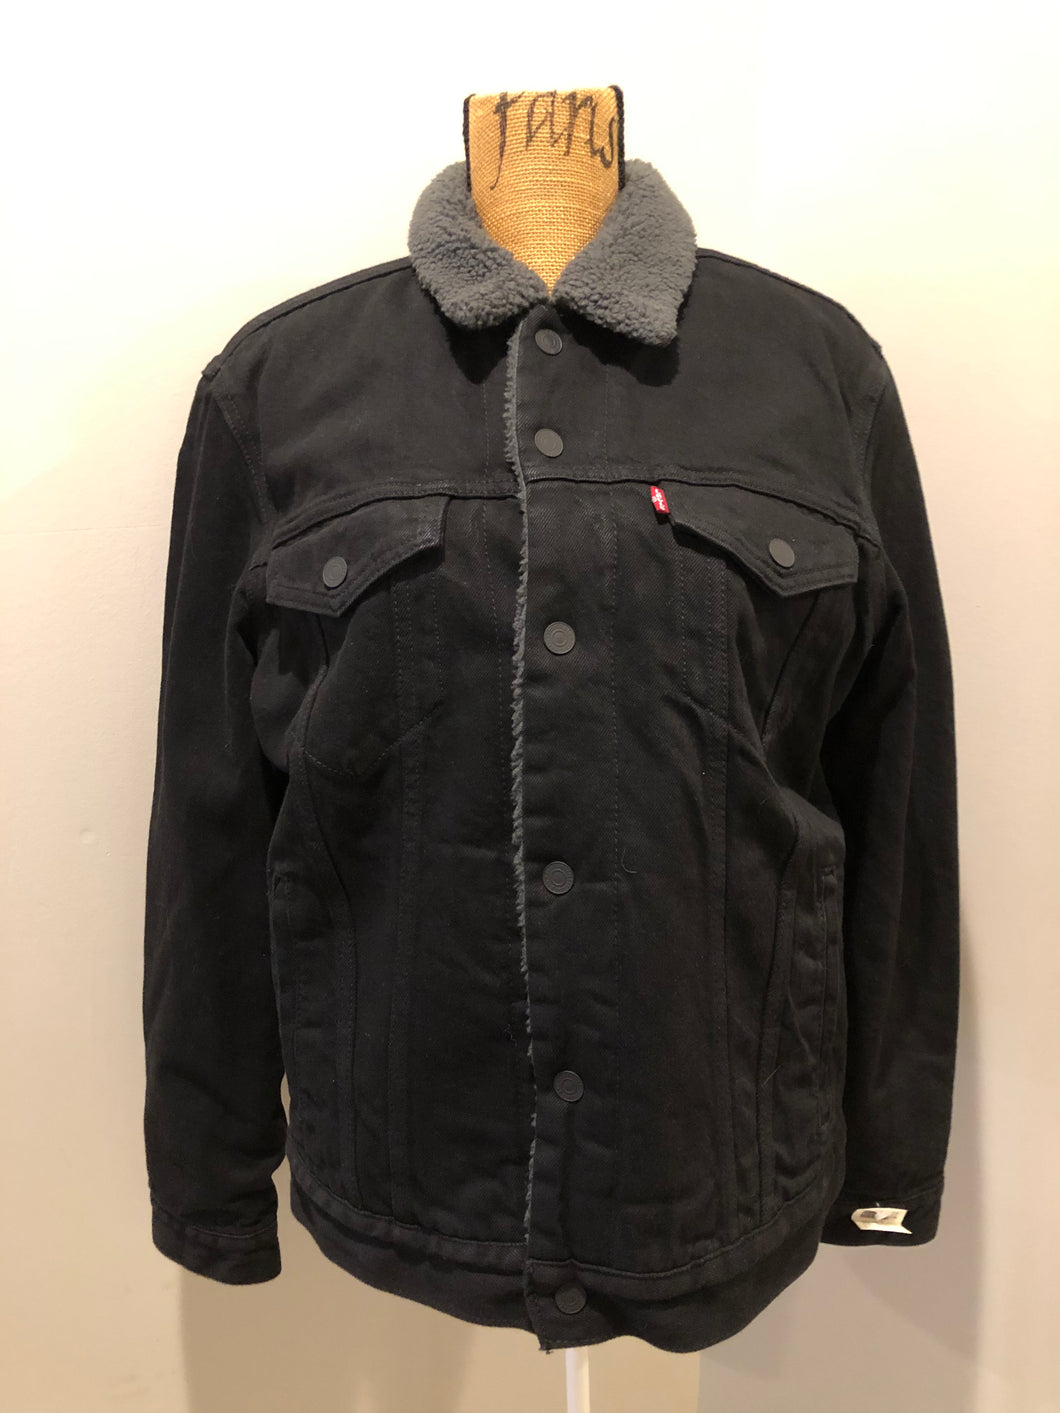 Kingspier Vintage - Levi’s denim sherpa jacket in black with grey faux fur lining, snap closures, vertical pockets, two flap pockets on the chest. Size medium